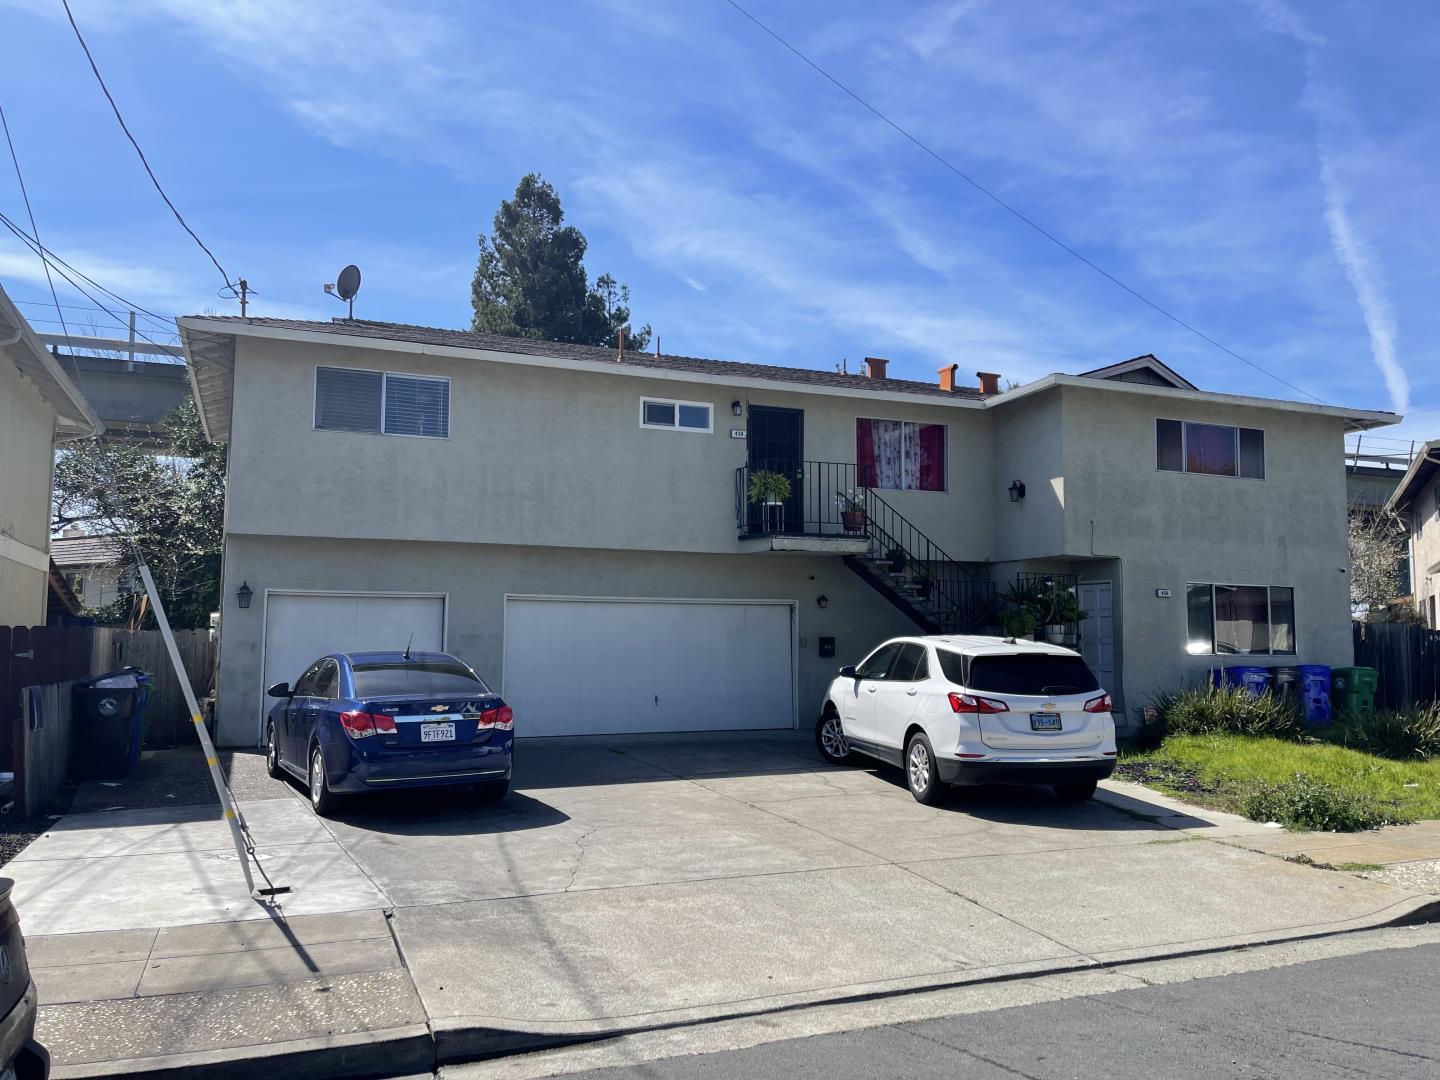 Photo of 456 Ruth Ct in San Leandro, CA